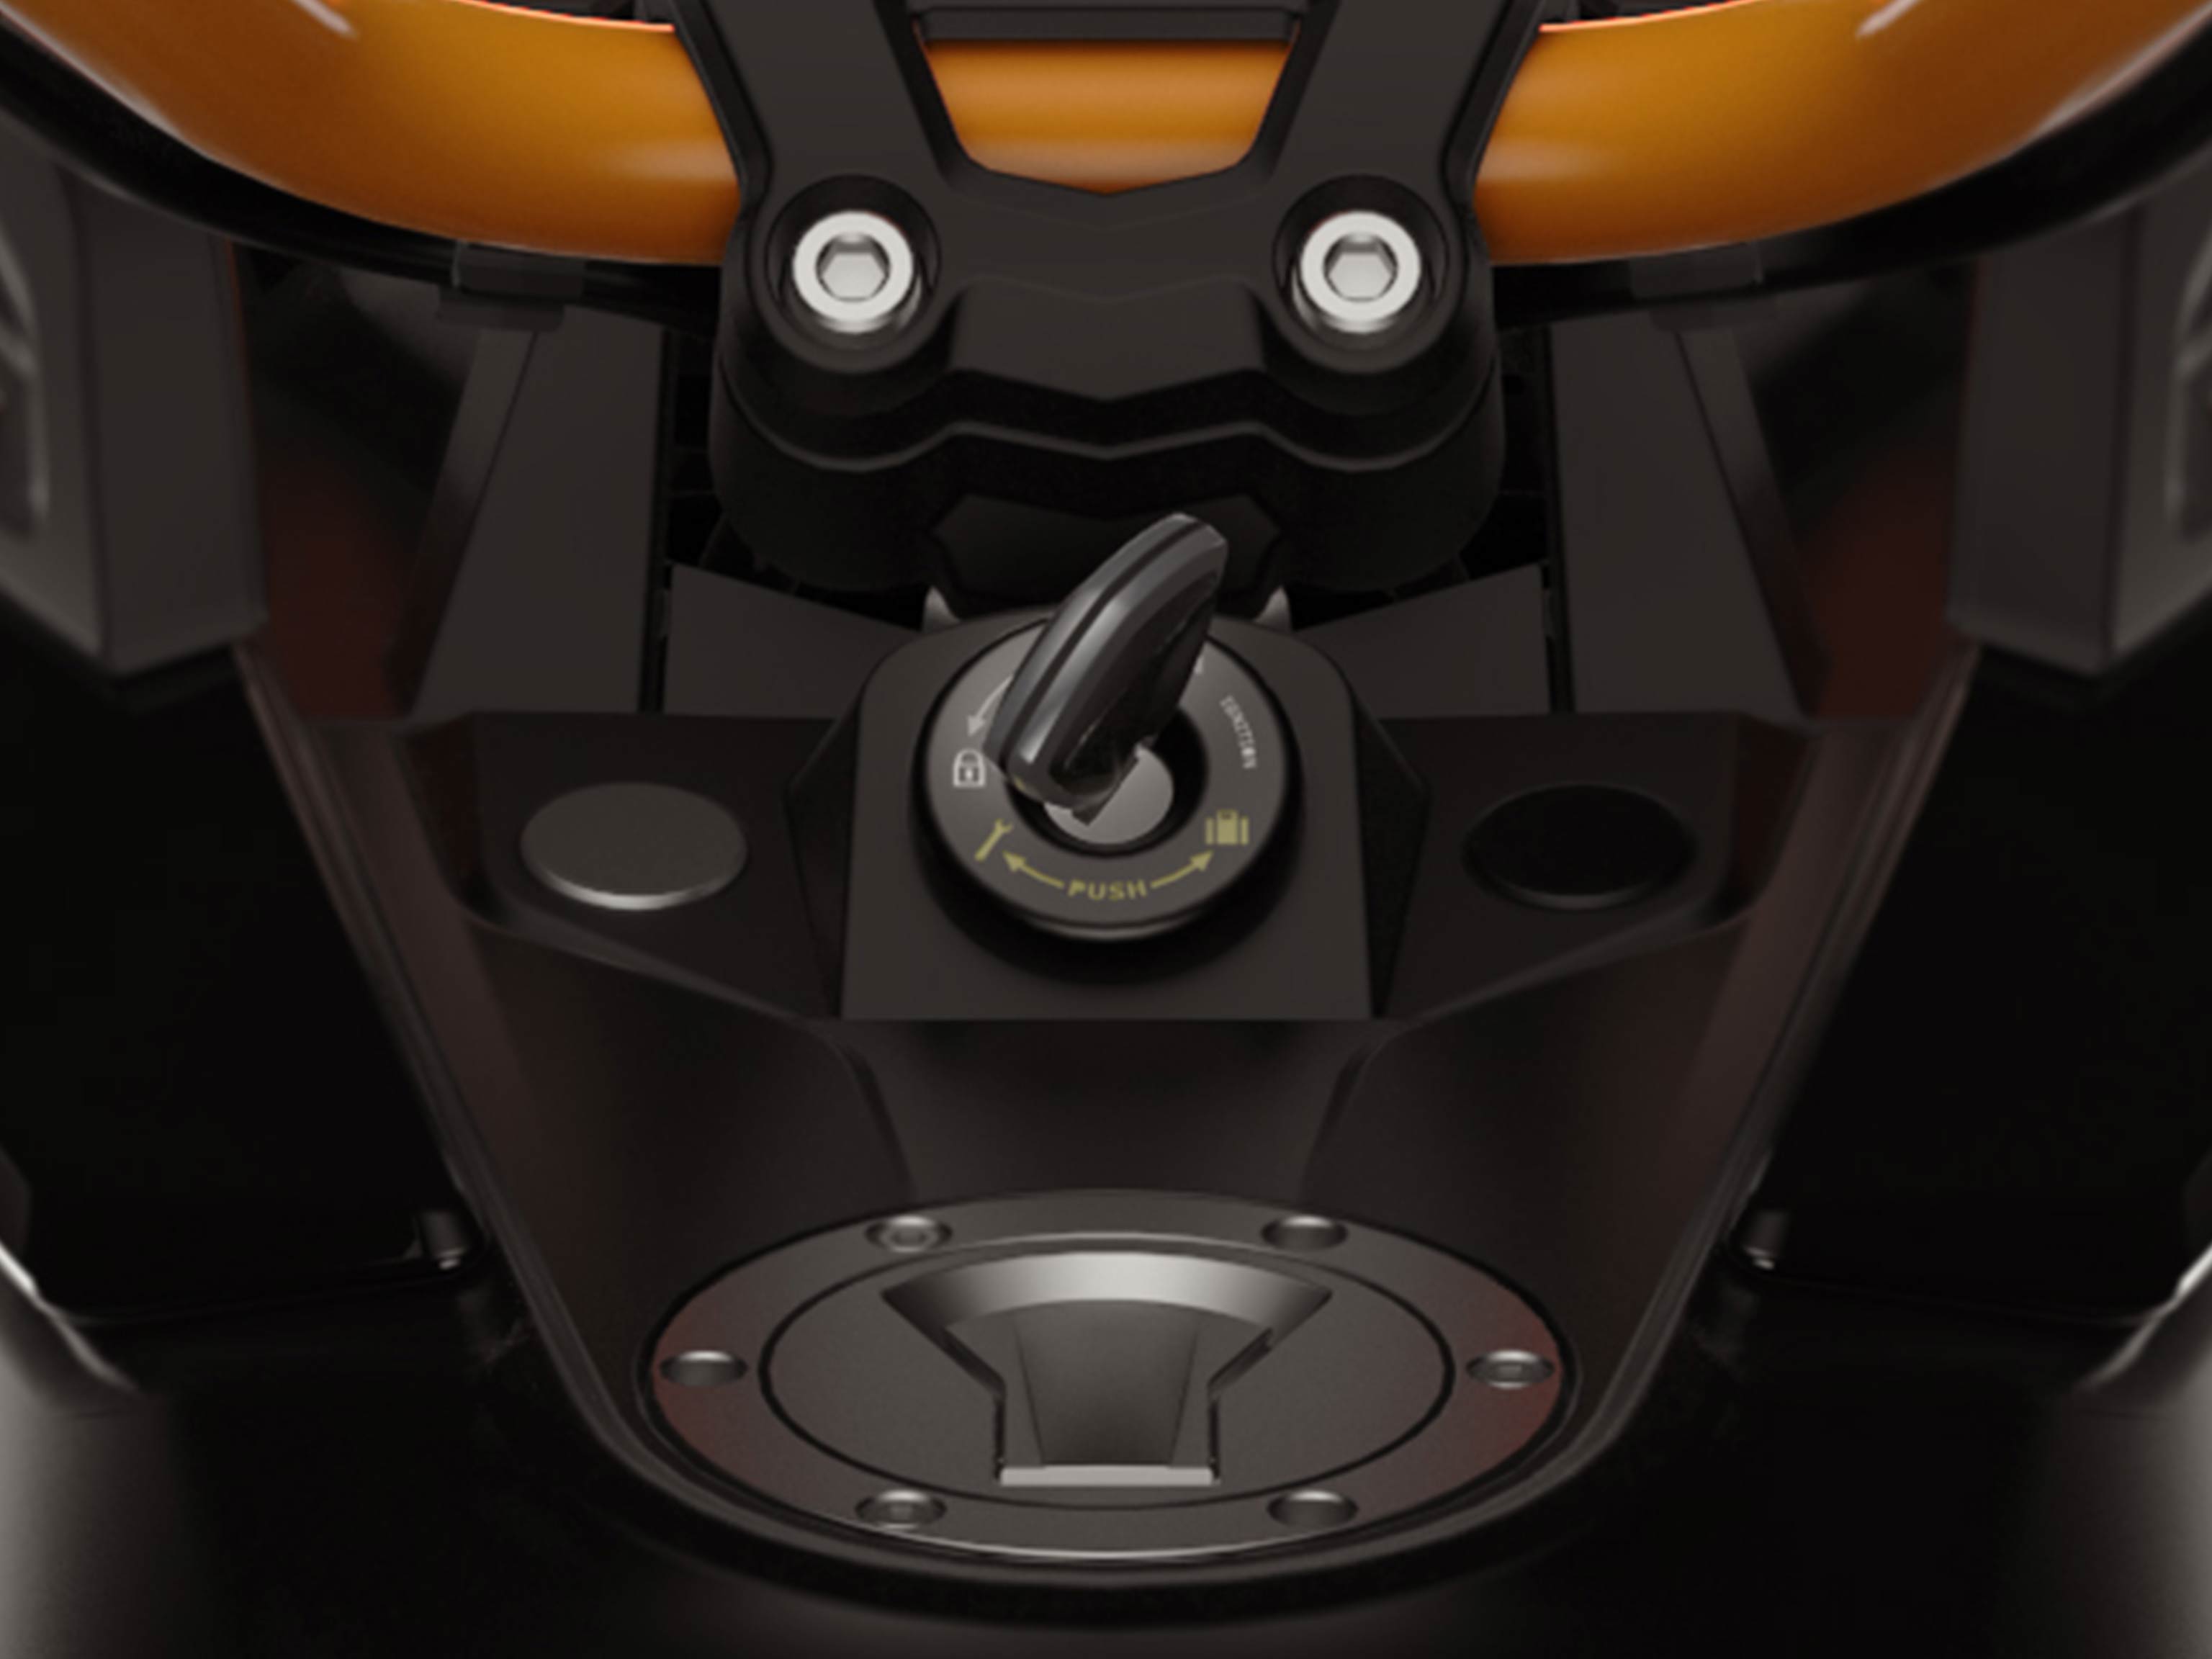 The anti-theft technology on the Can-Am Spyder F3	